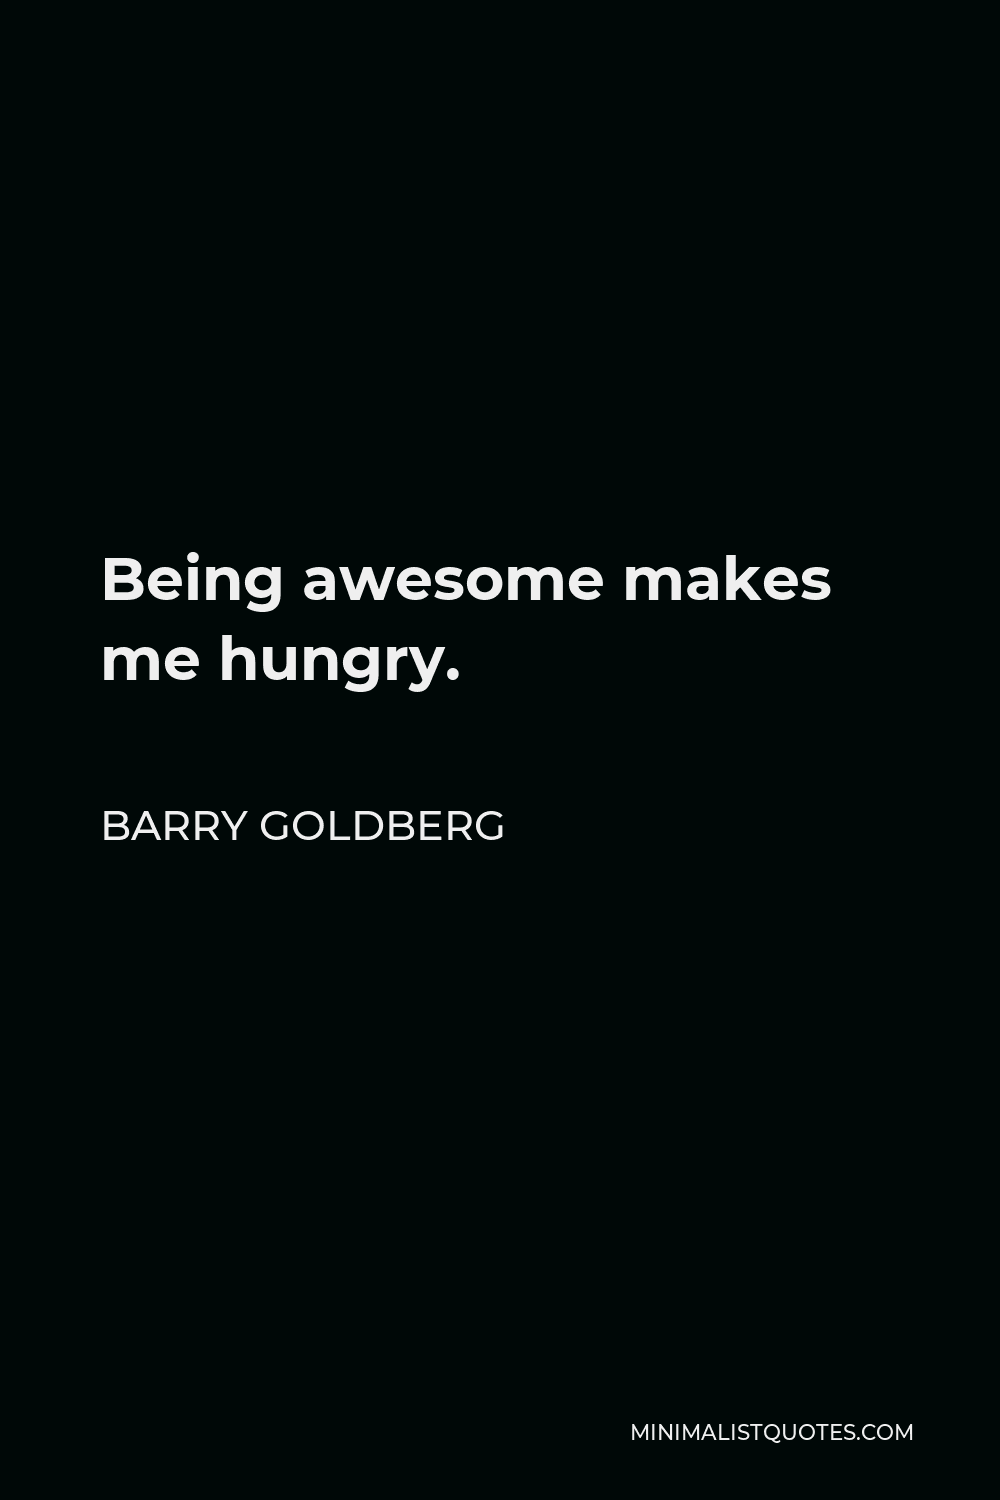 Barry Goldberg Quote - Being awesome makes me hungry.